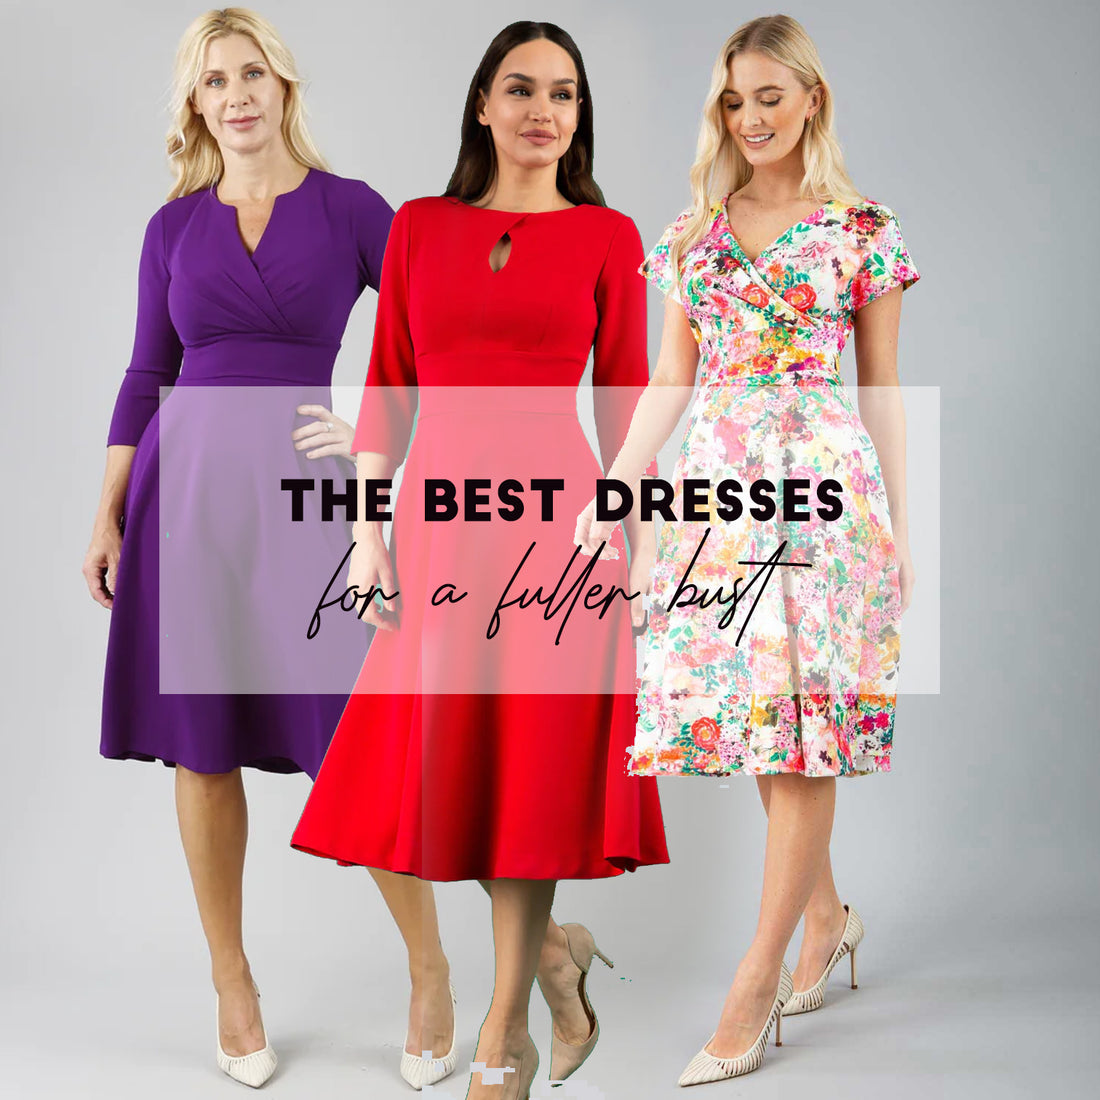 The Best Dresses to Wear With a Fuller Bust –